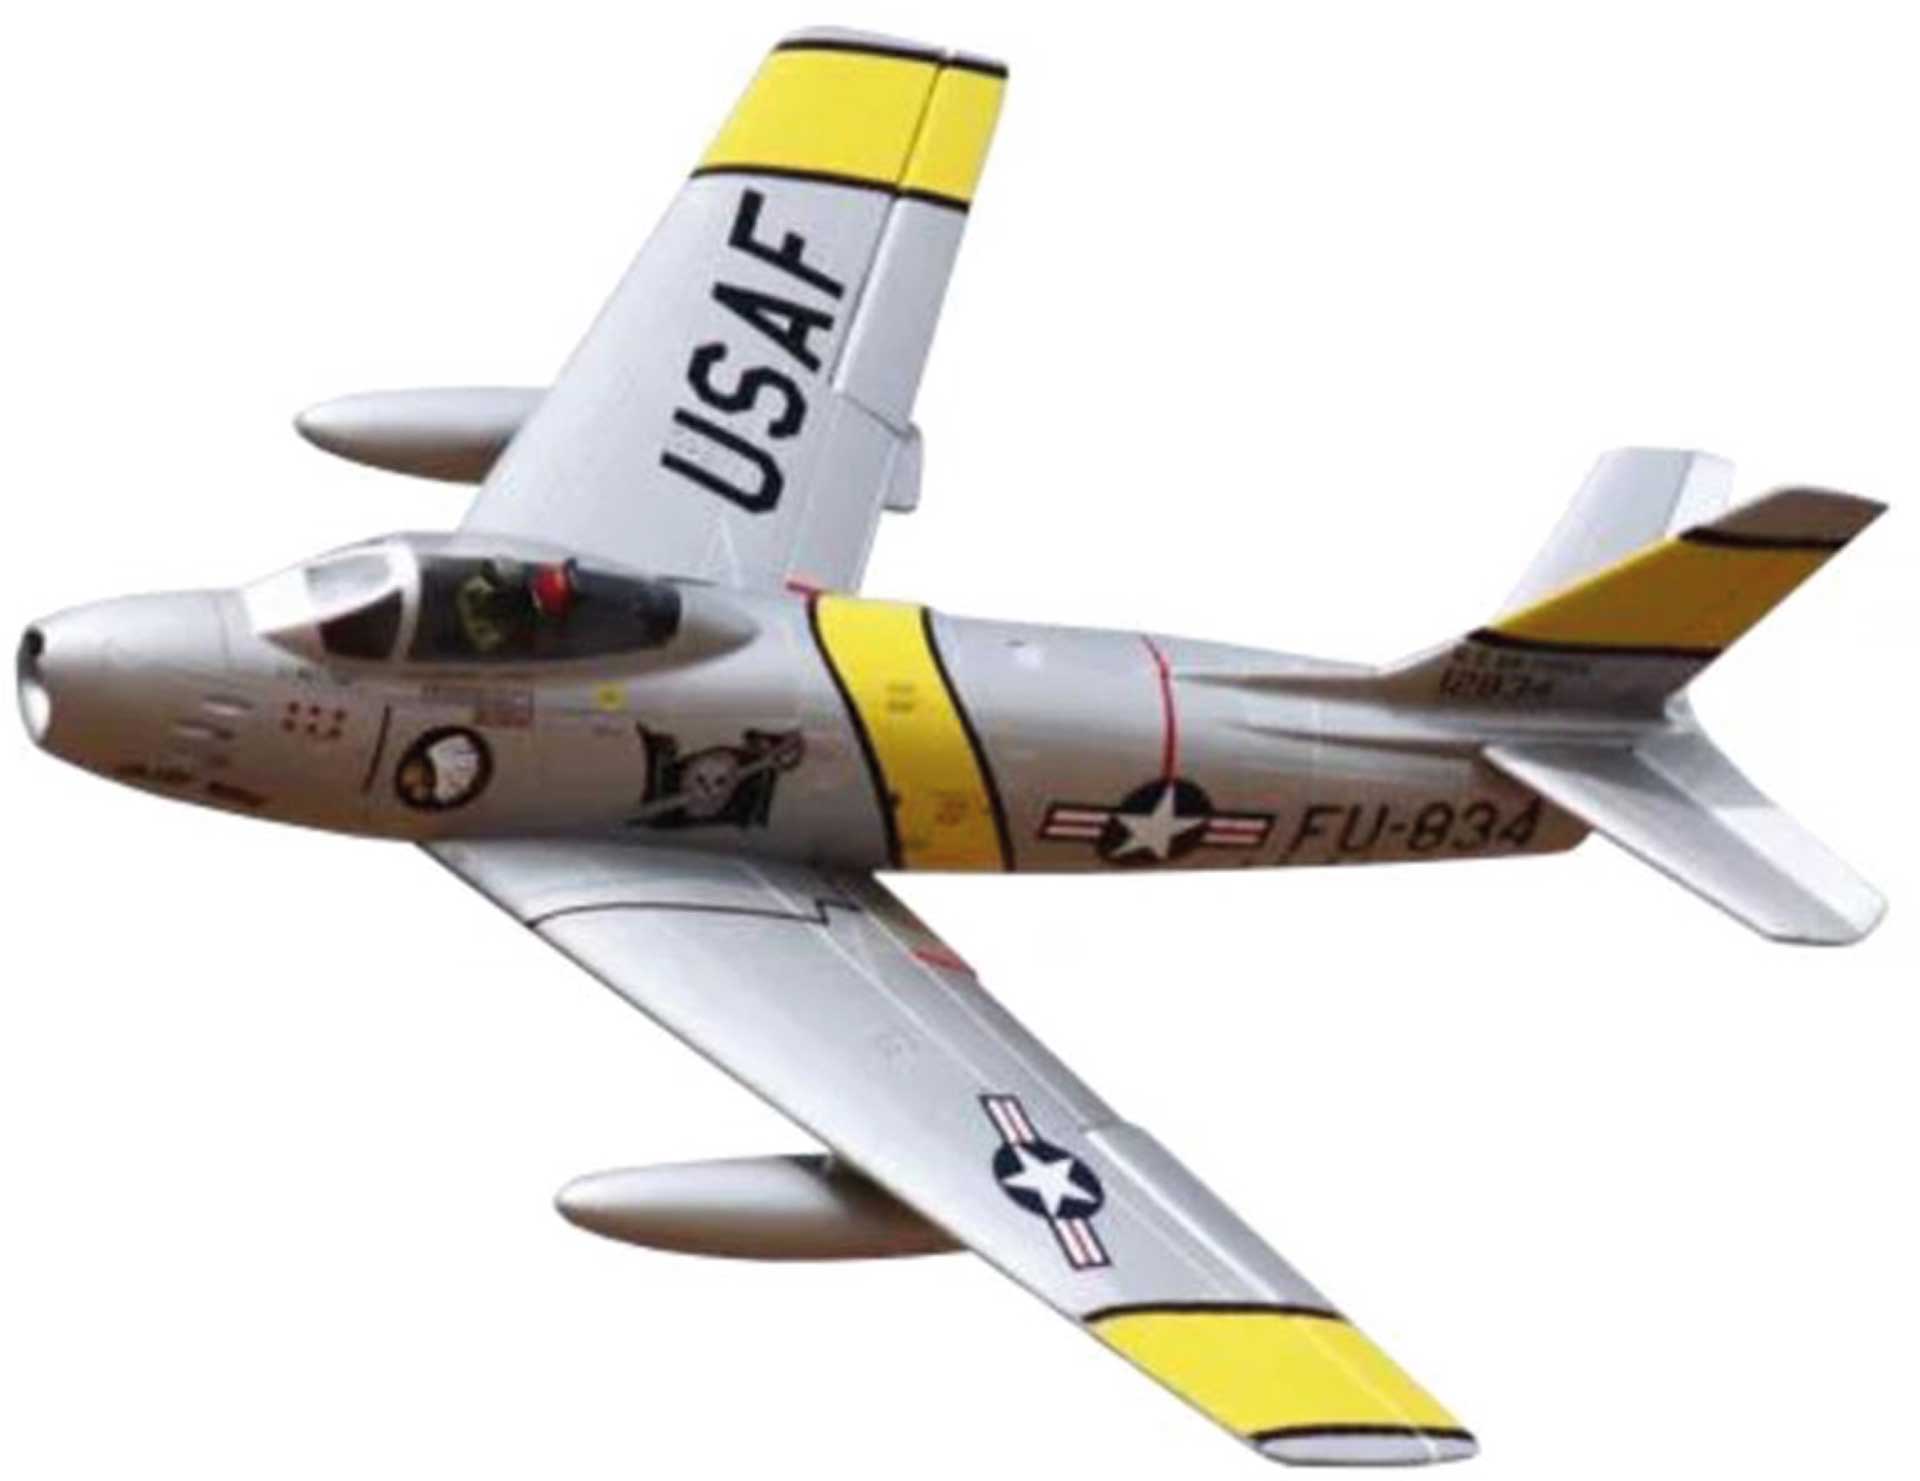 FREEWING F-86 Sabre 1200mm Deluxe Edition PNP